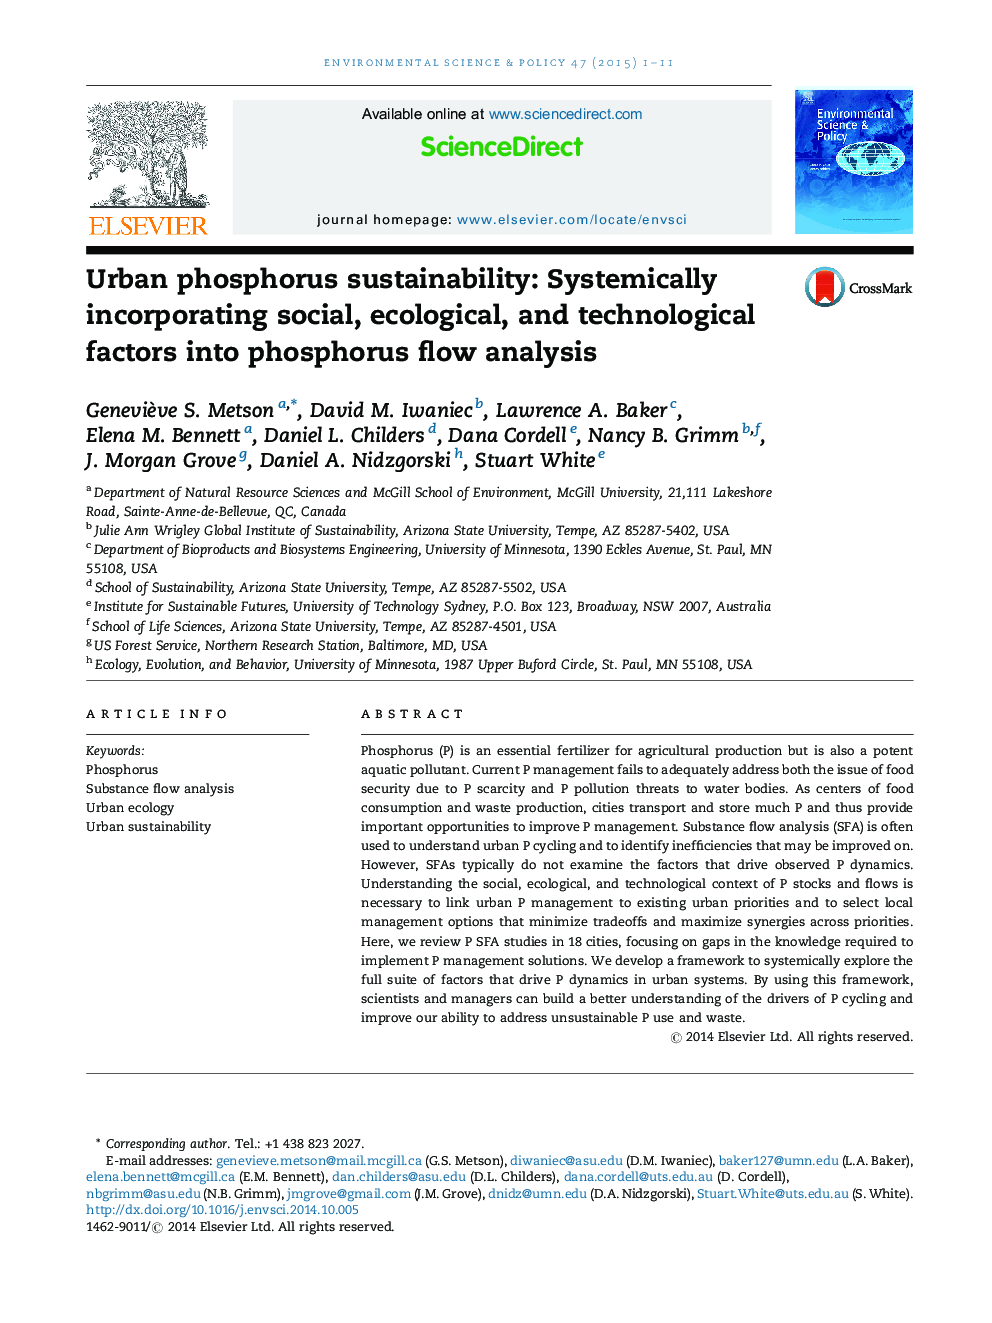 Urban phosphorus sustainability: Systemically incorporating social, ecological, and technological factors into phosphorus flow analysis